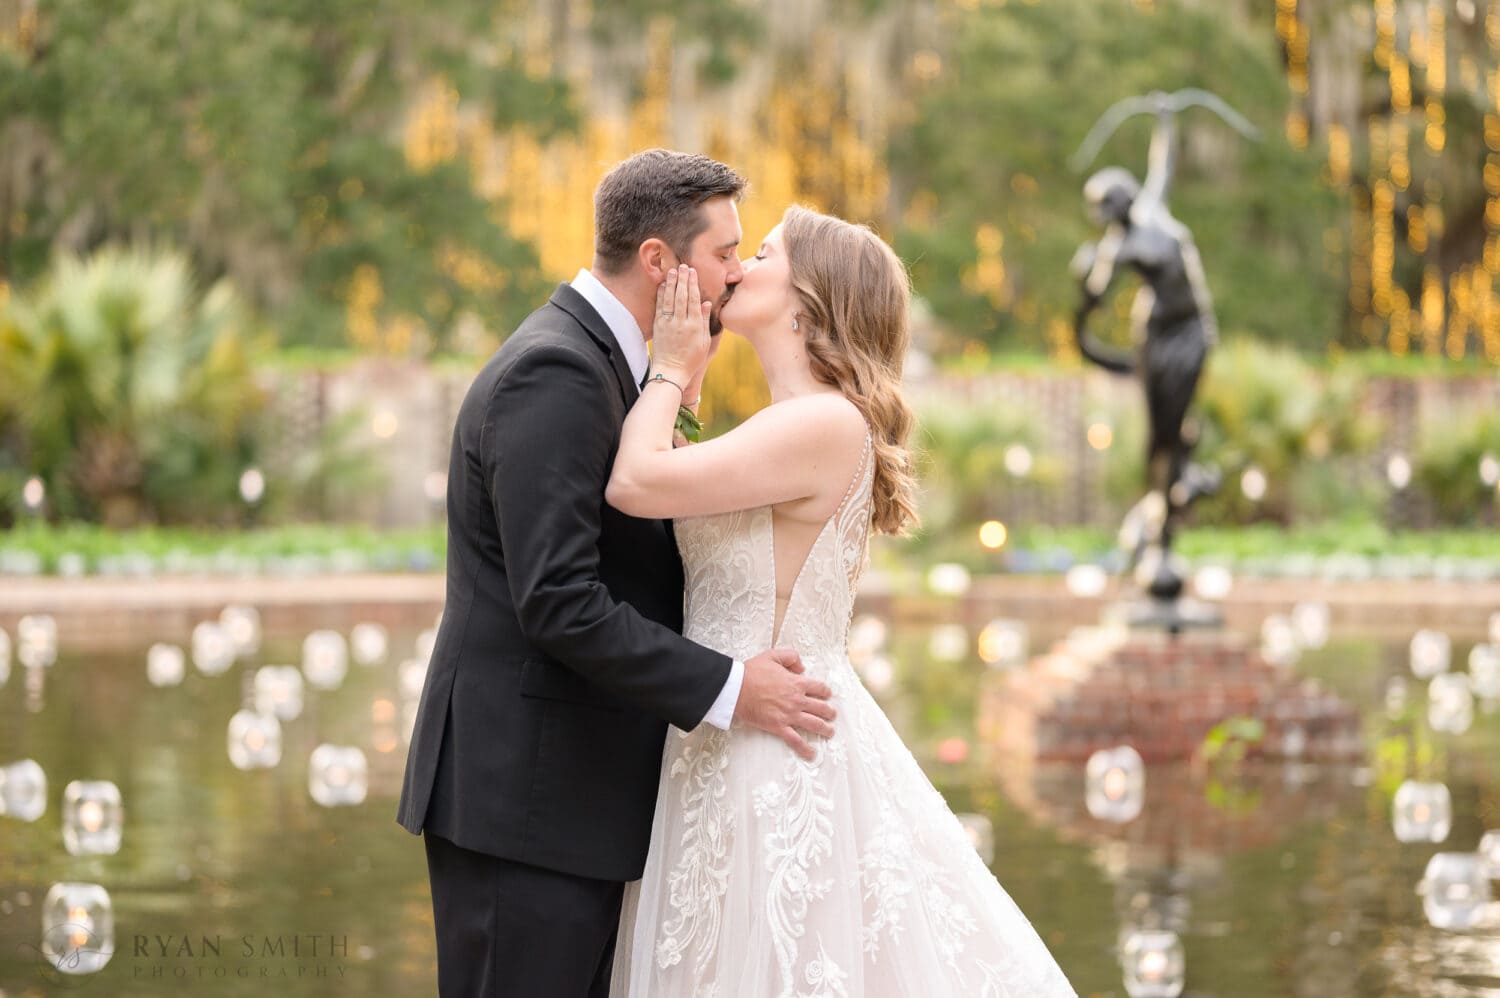 Bride pulling grooms face in for a kiss - Diana of the Chase Fountain - Brookgreen Gardens